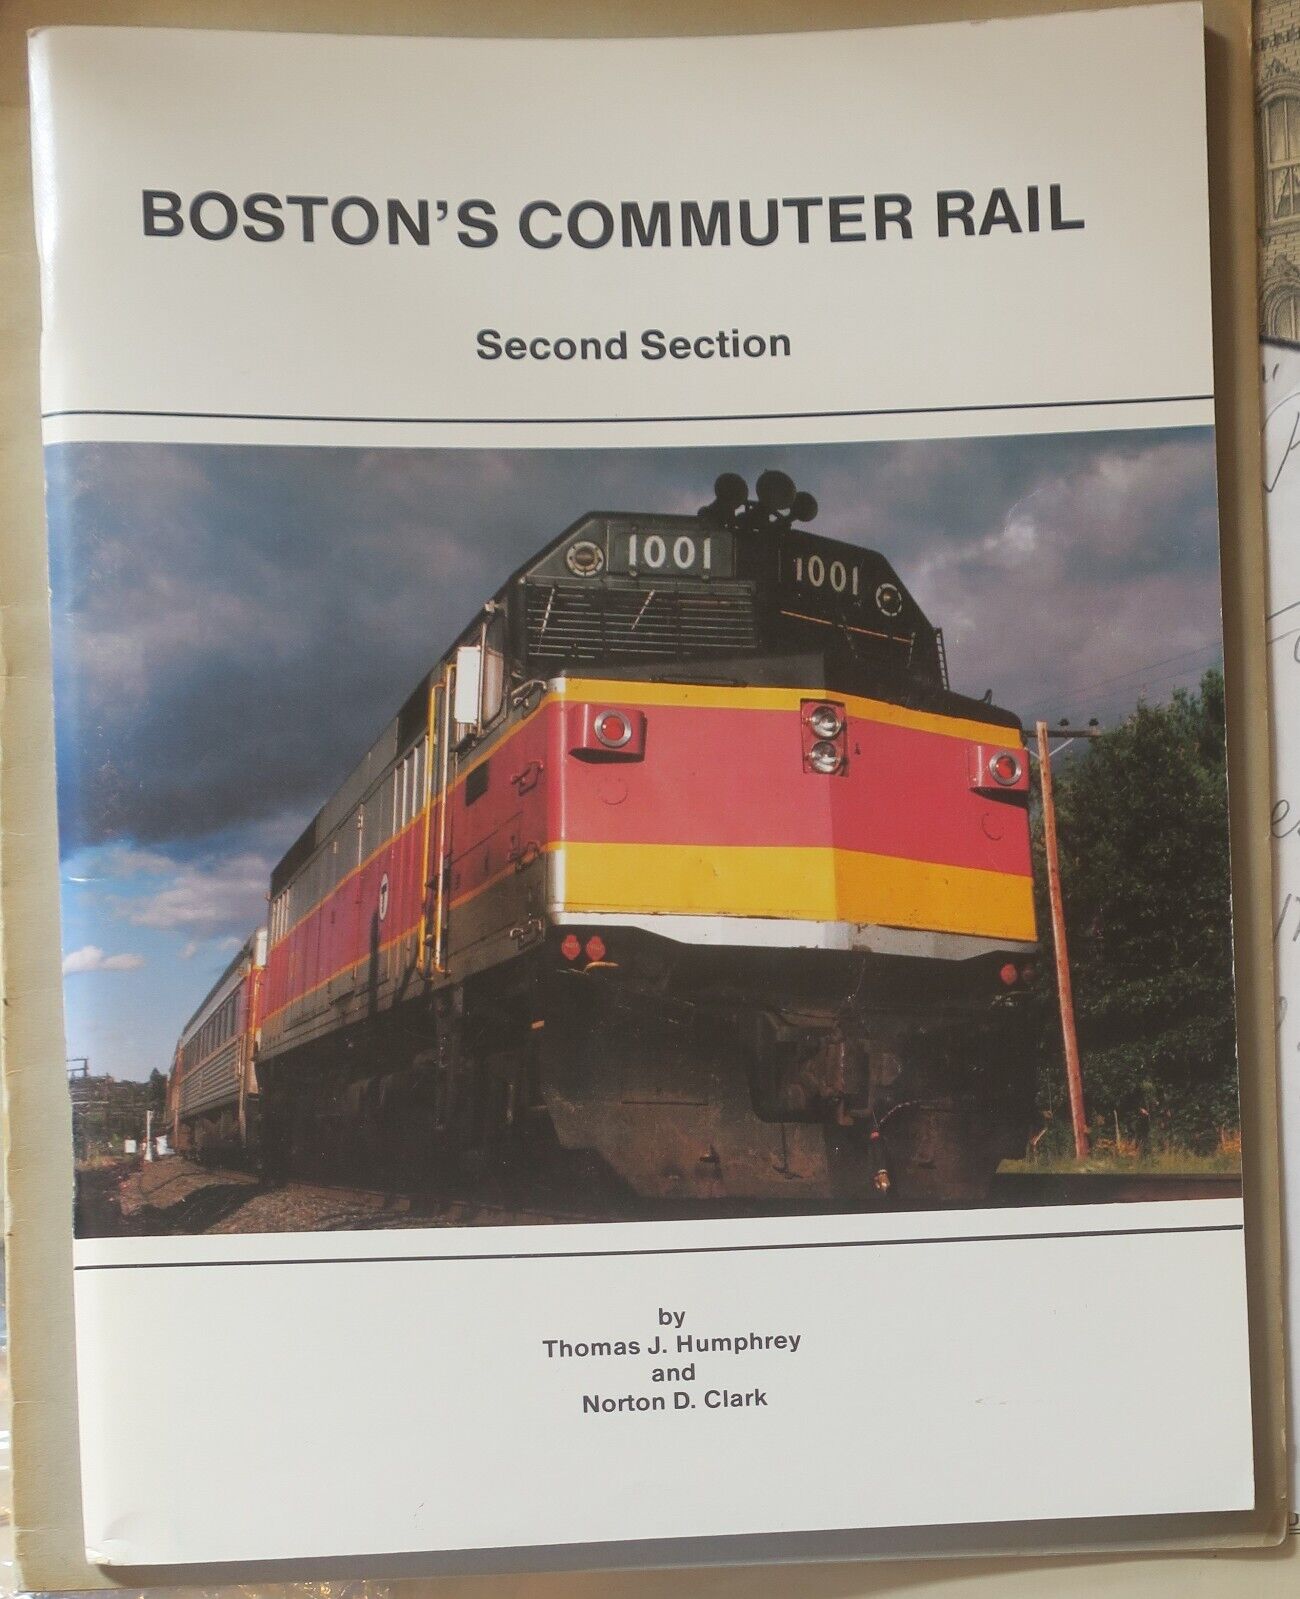 Boston's Commuter Rail: Second Section-many historical photos,trains,depots,cars